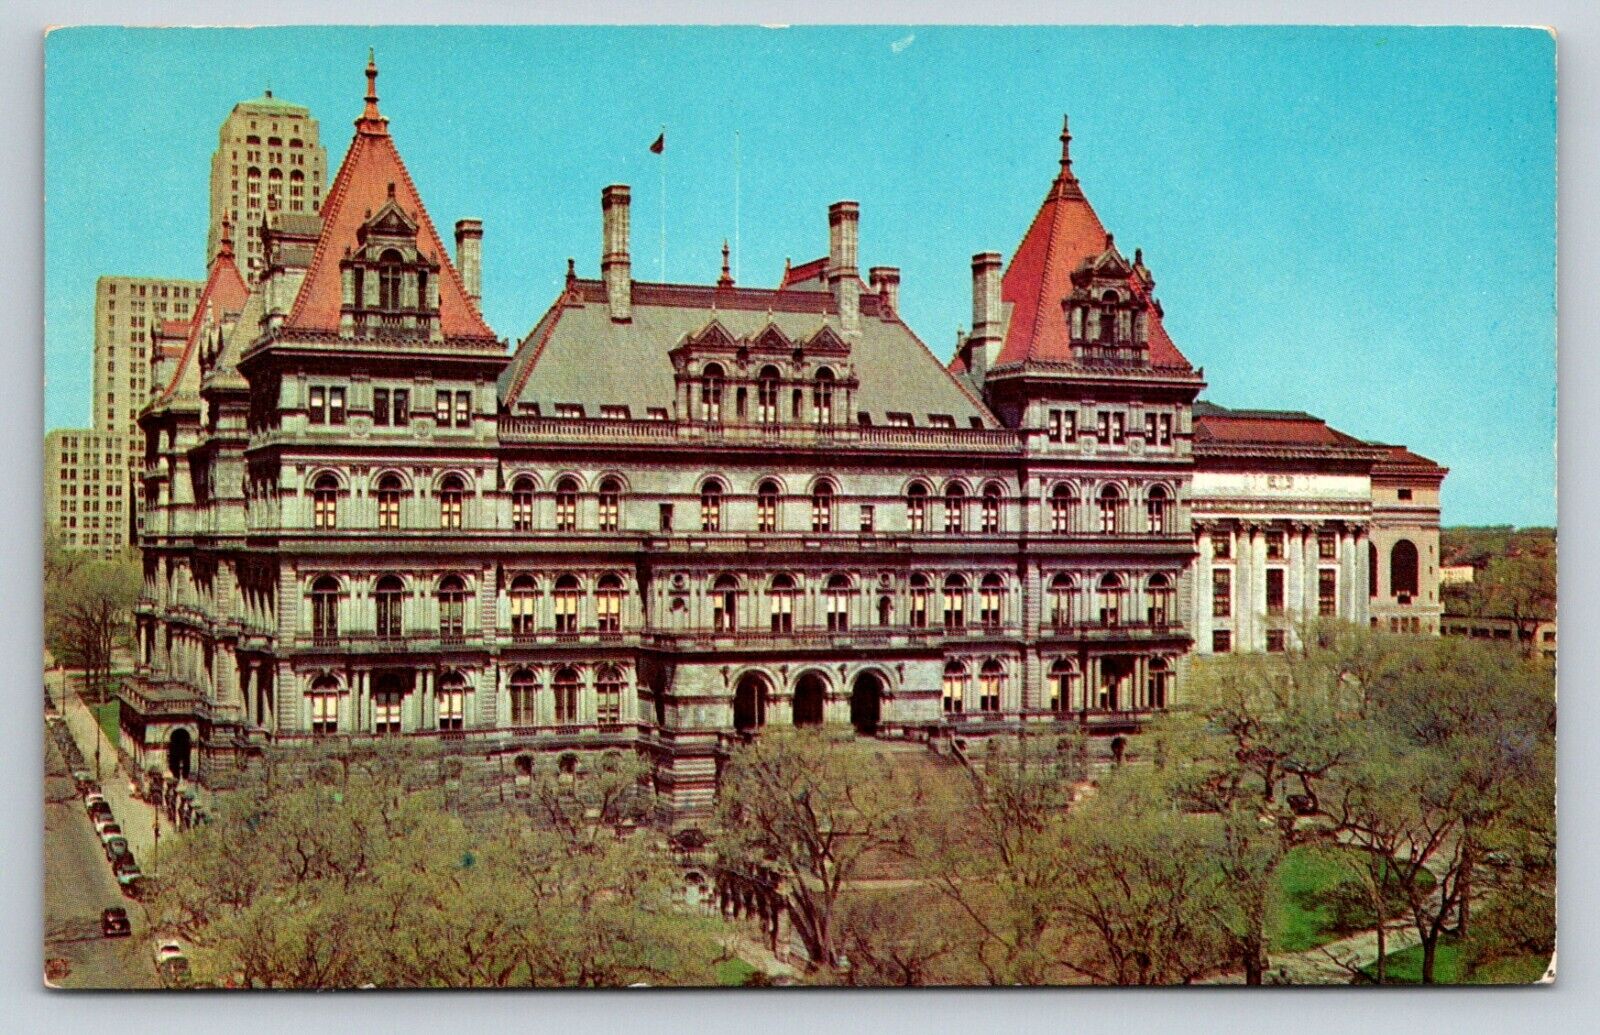 State Capitol Building Albany NY New York 1950s Postcard